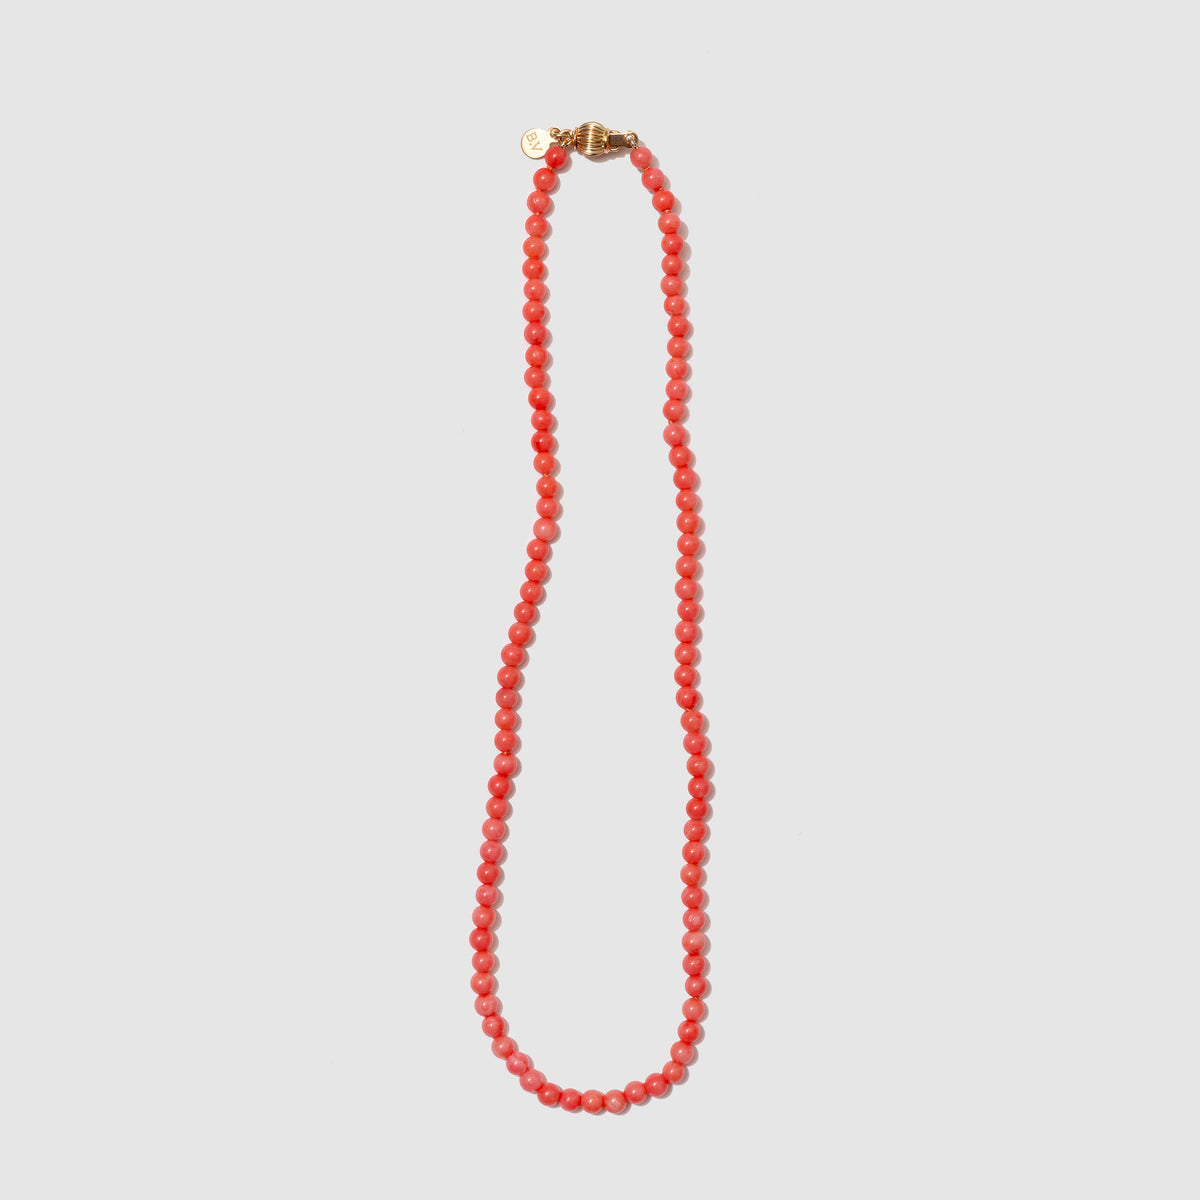 Beatrice Valenzuela - BABY PINK BAMBOO CORAL BRUJERÍA NECKLACE